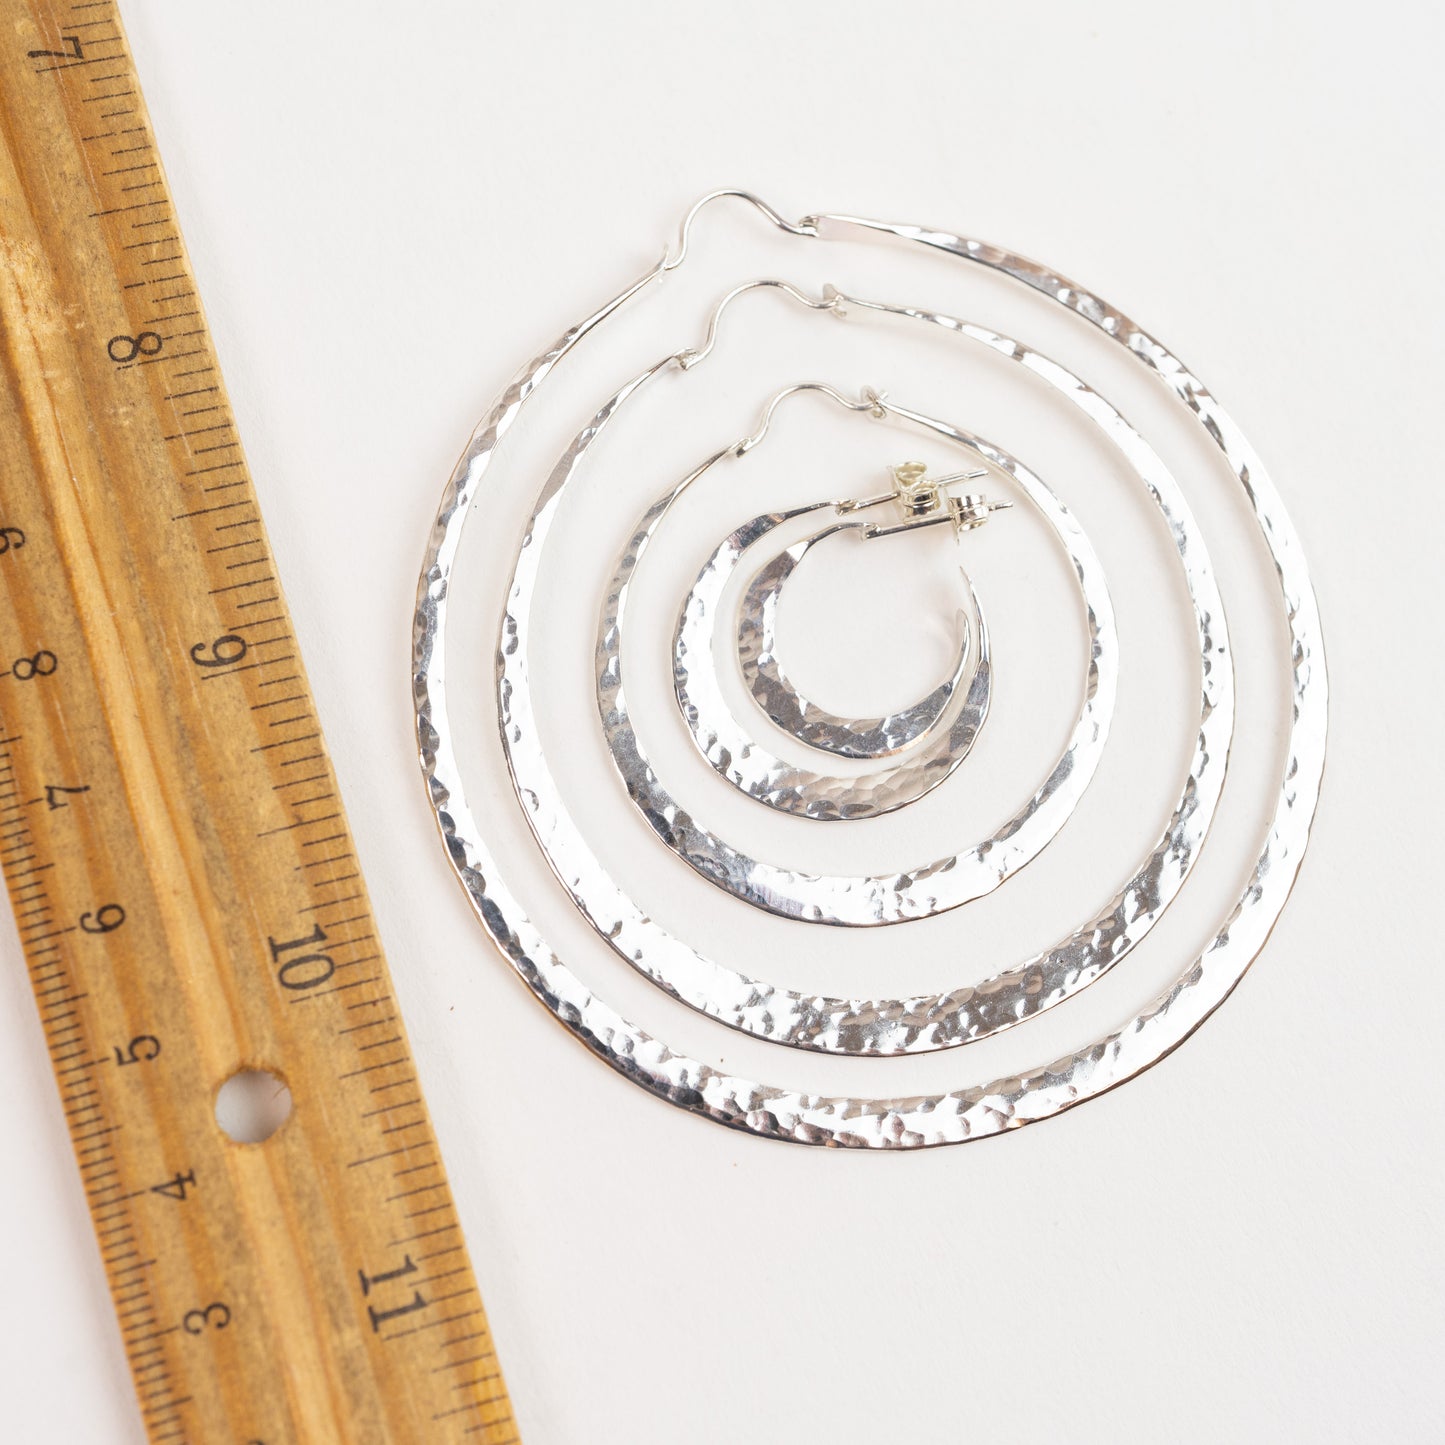 Hoops - Our Collection of Sterling Silver XXXL - 3", large 2-1/4", and medium 1.80", . Also small and large post hoop earrings! Worn everyday with every outfit.